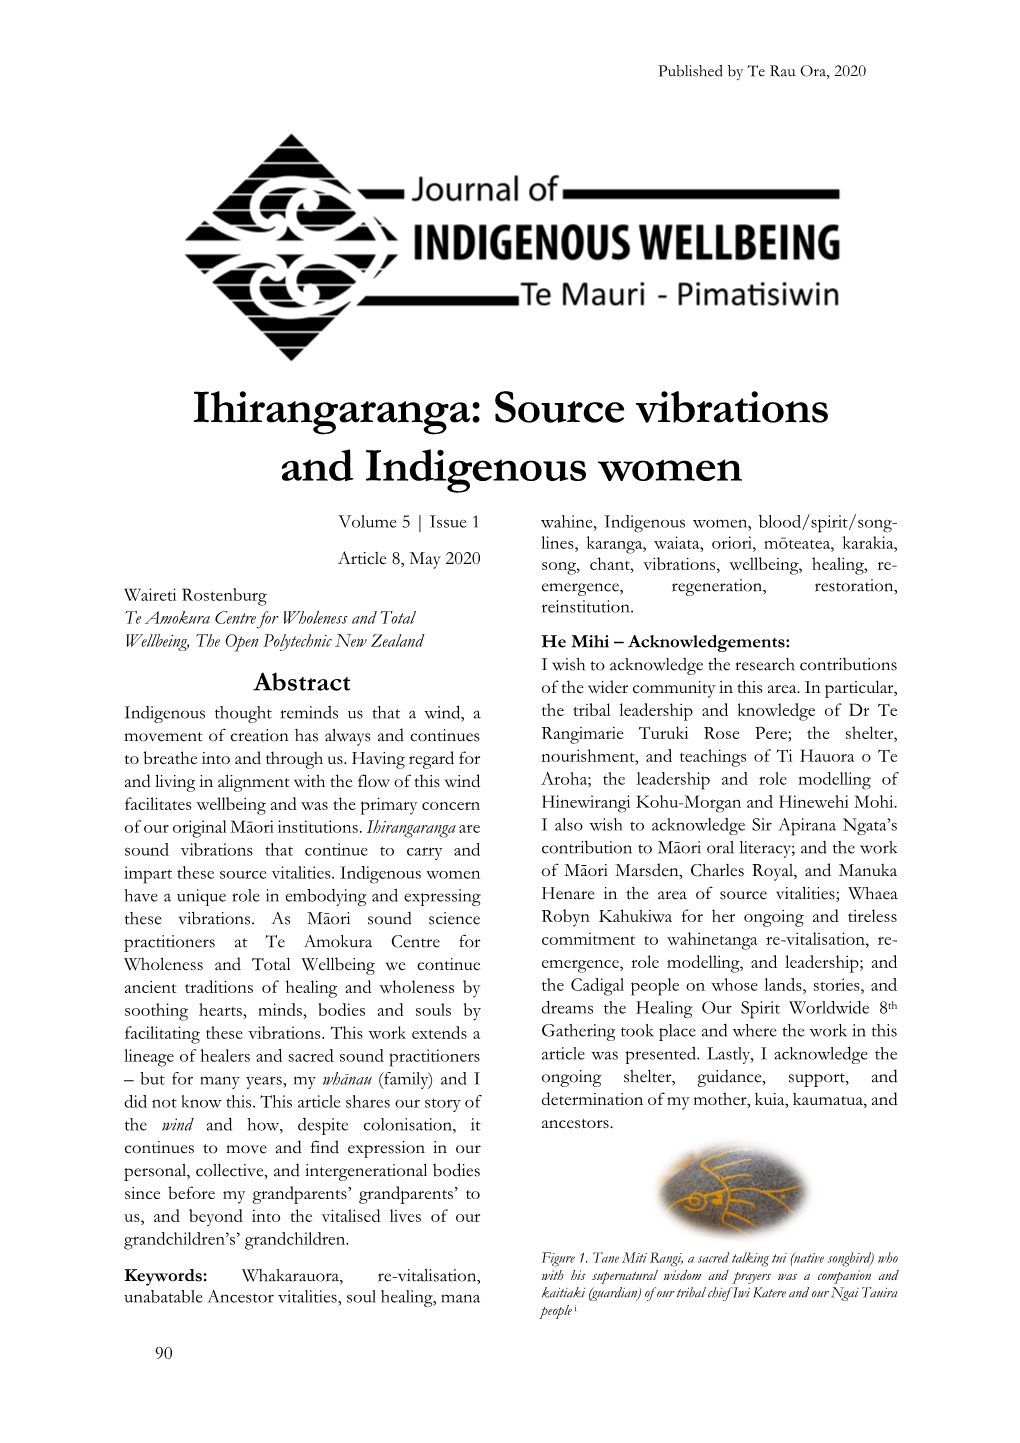 Source Vibrations and Indigenous Women